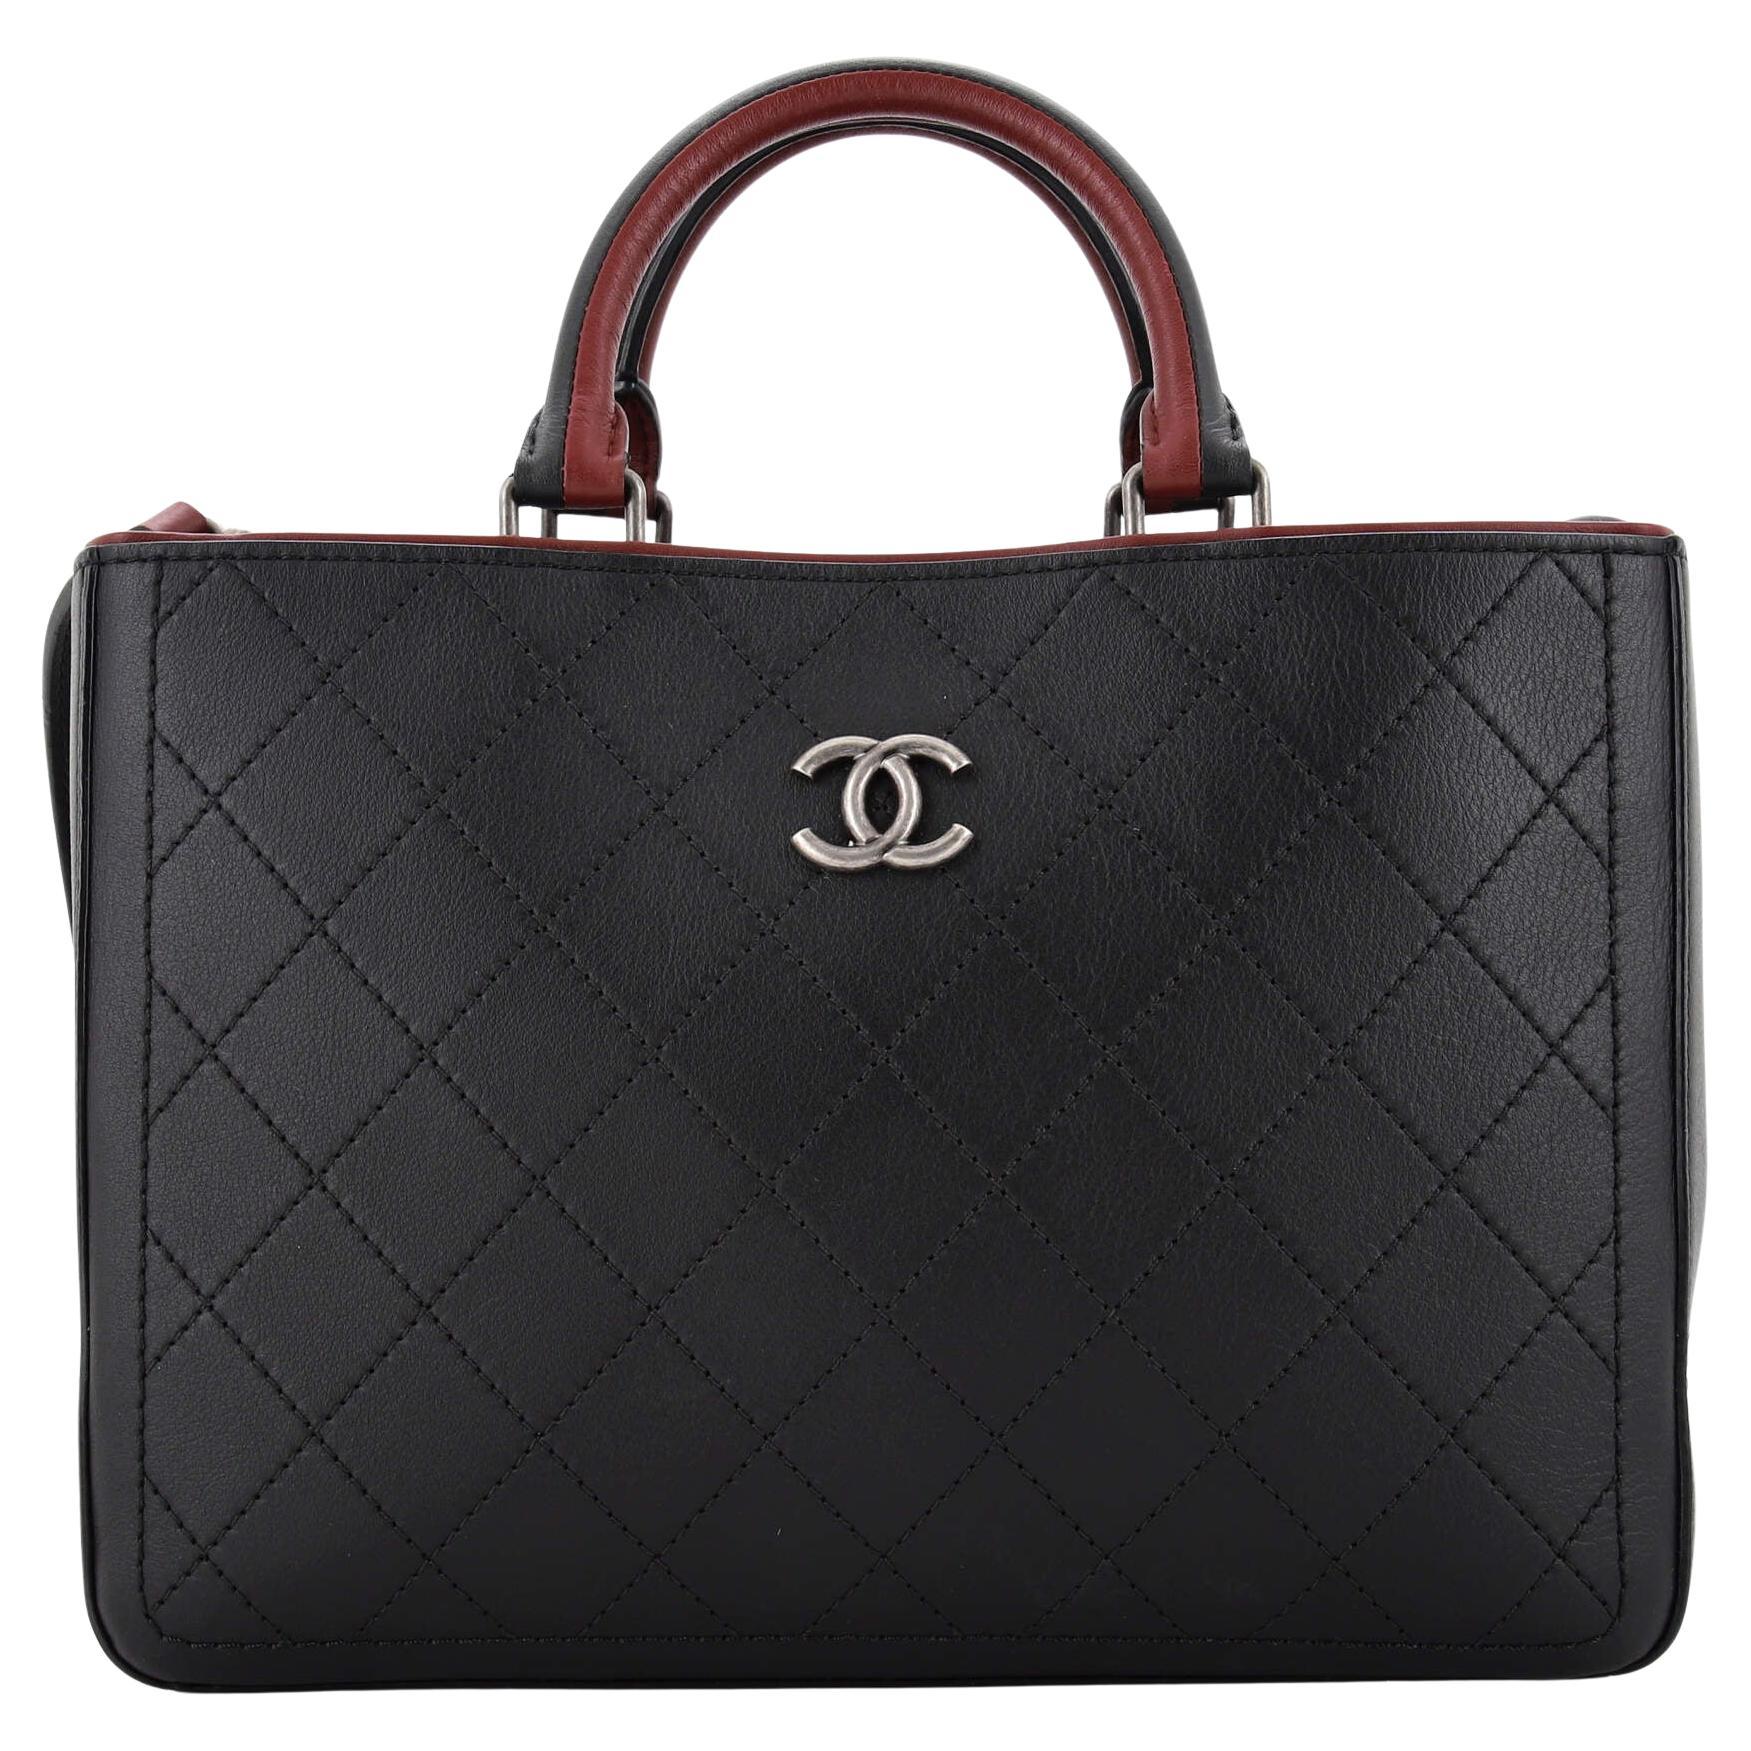 Chanel Wild Stitch Small Tote – Dina C's Fab and Funky Consignment Boutique